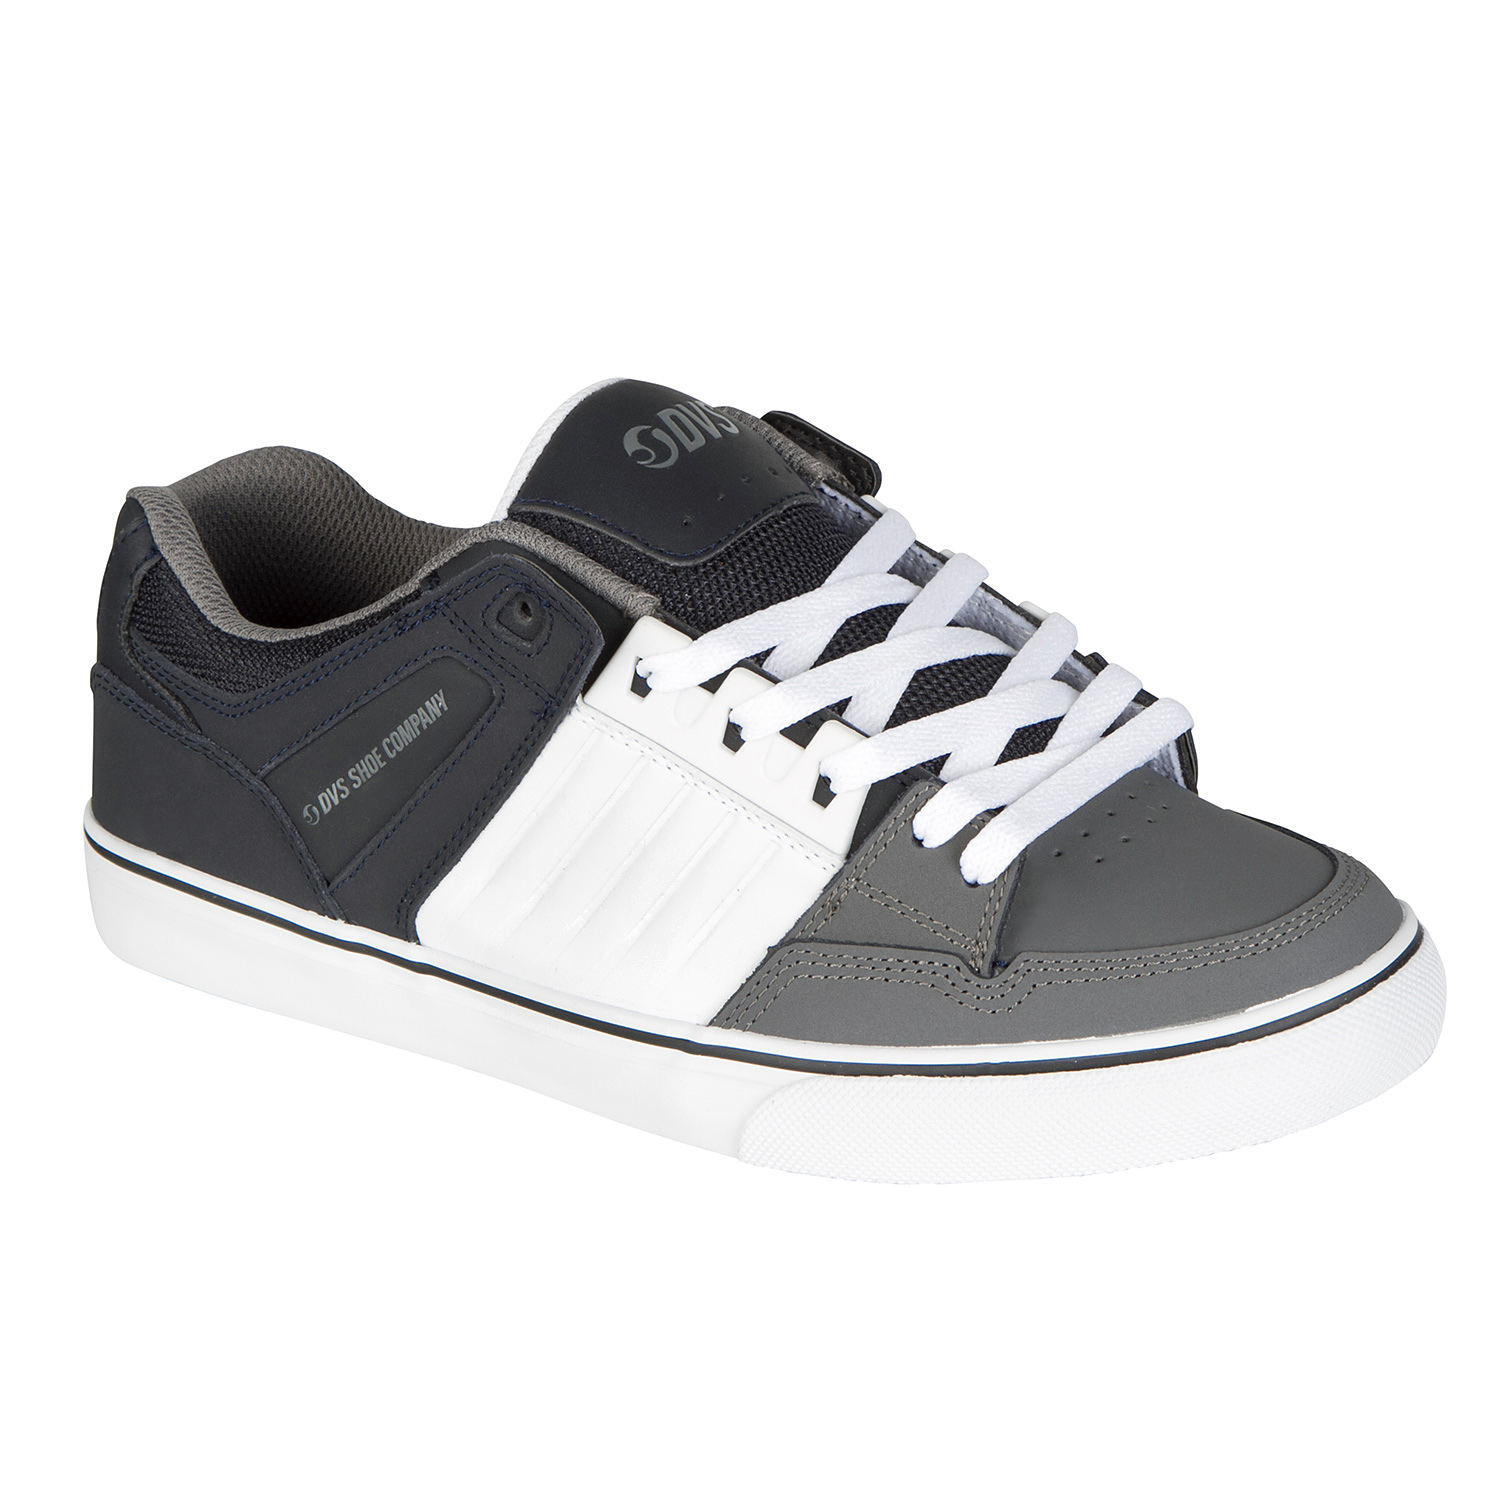 DVS Schuhe Celsius CT Navy/Weiß/Charcoal Leather